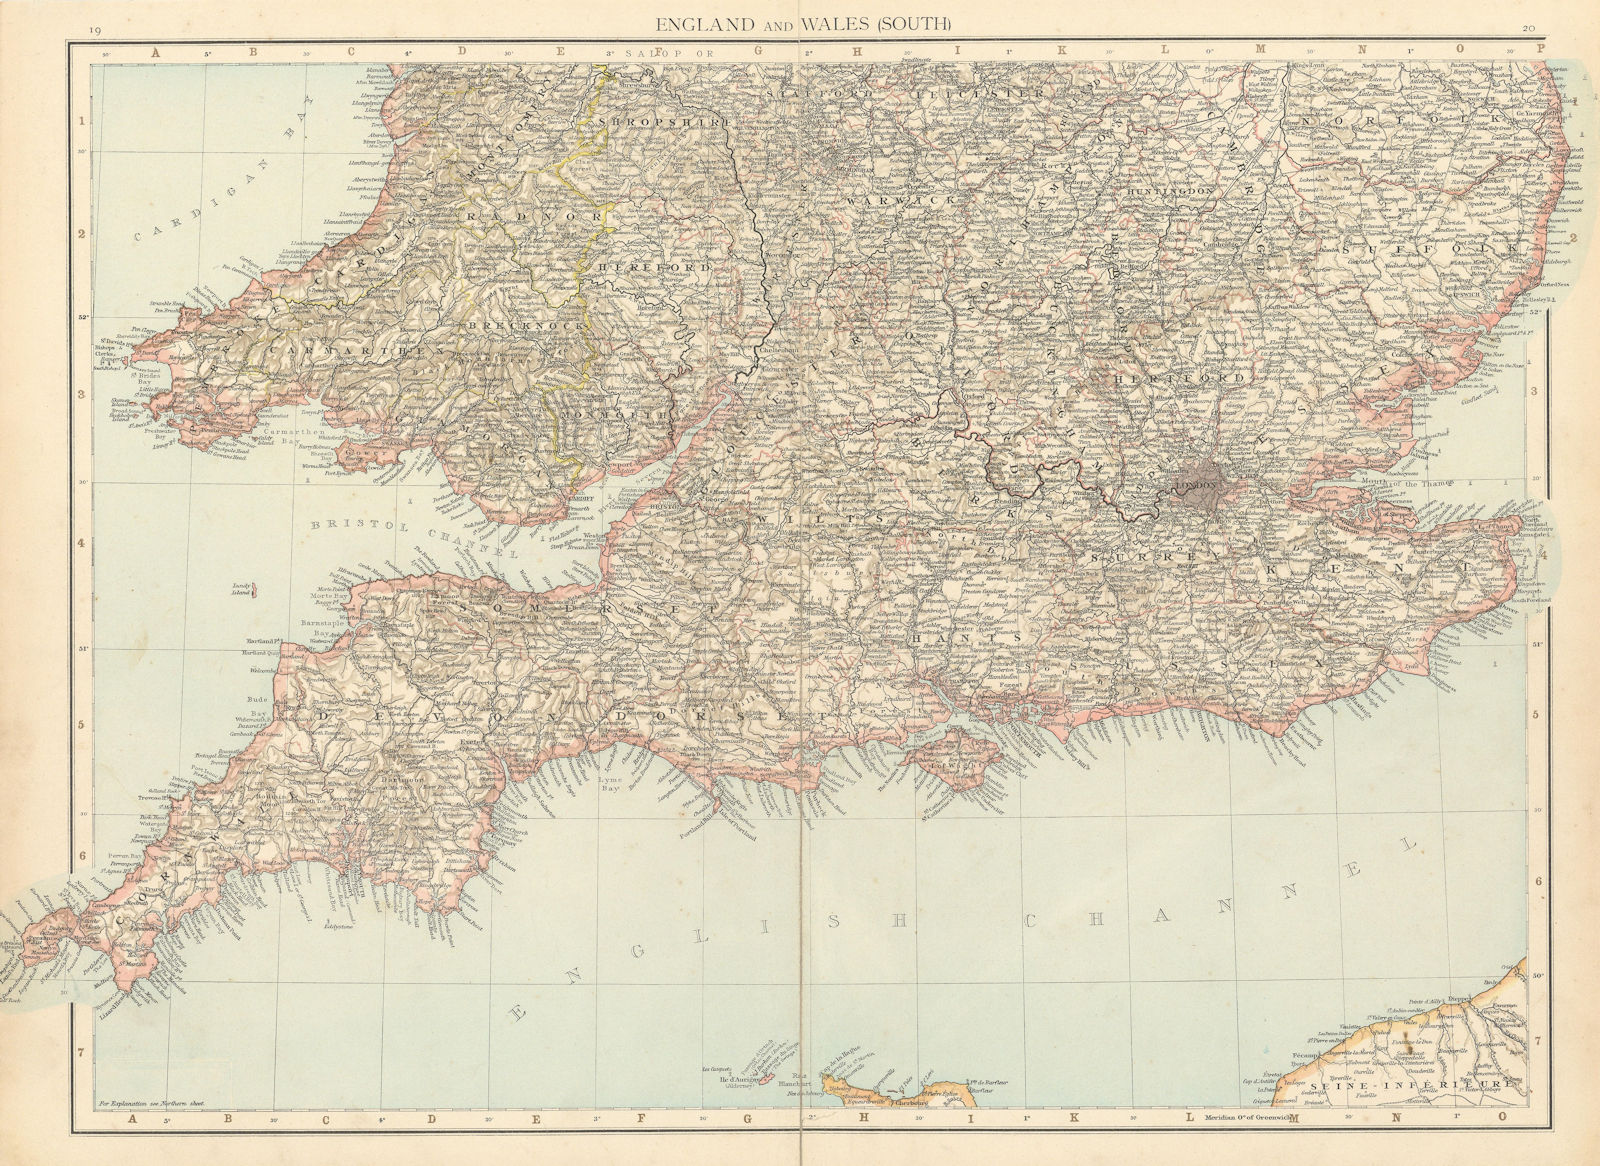 Associate Product England & Wales South. Home counties Devon Cornwall Midlands. TIMES 1895 map